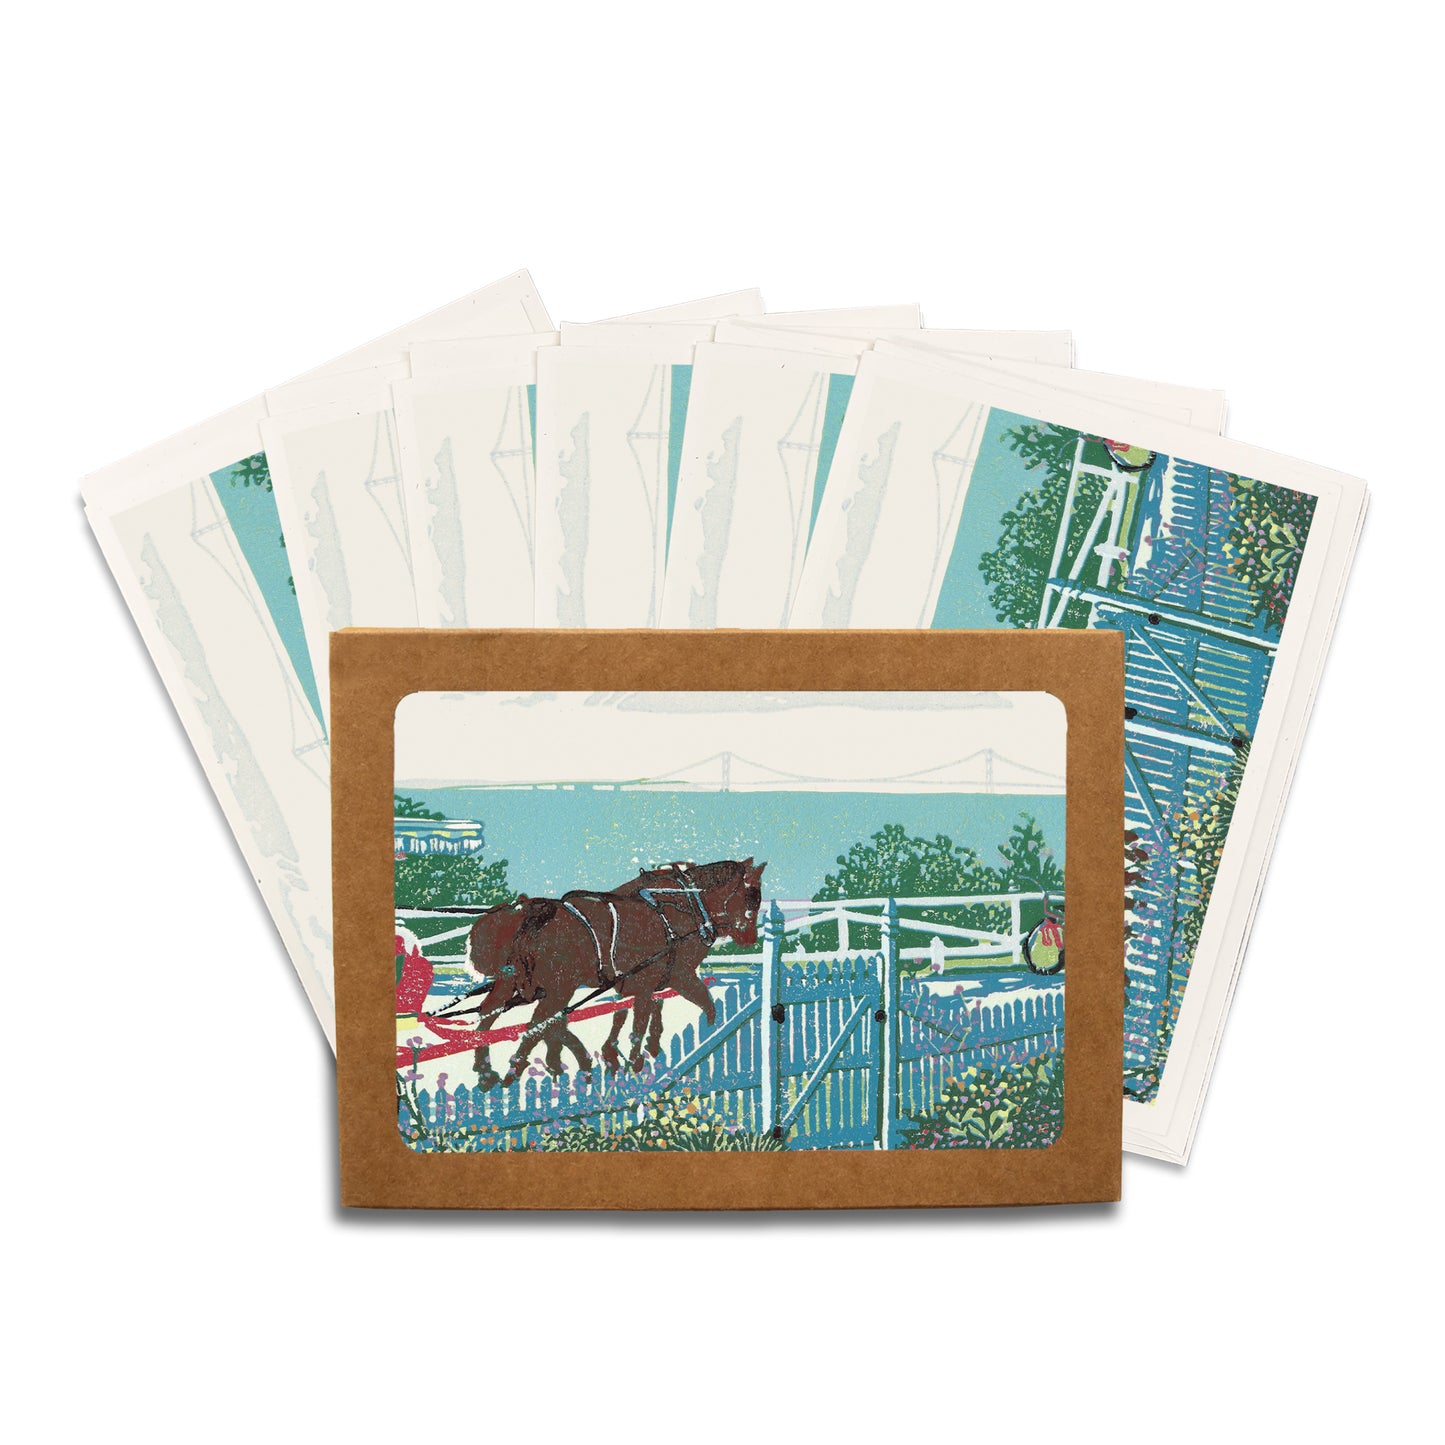 Mackinac Garden Gate.  A casually elegant Mackinac Island card featuring a digital reproduction of a block print design with the same title by Natalia Wohletz of Peninsula Prints, Milford and Mackinac Island, Michigan.